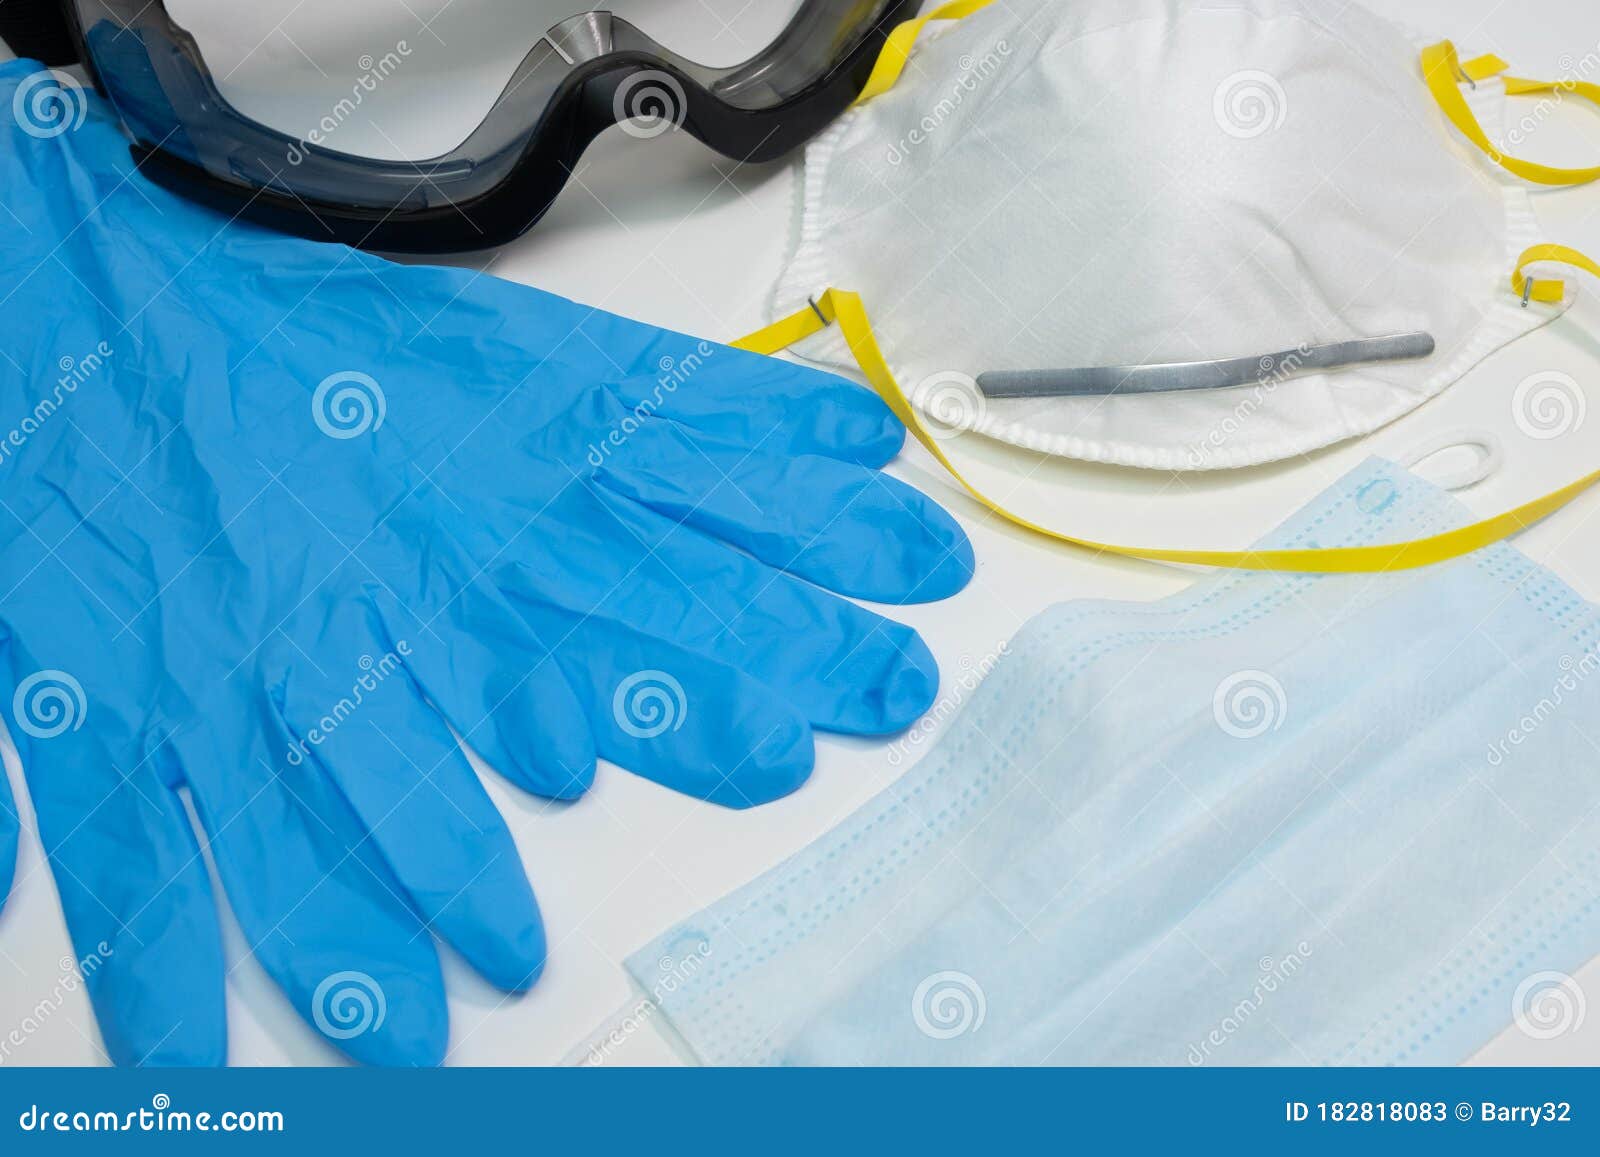 ppe personal protective equipment for medical use or virus prevention on white table.